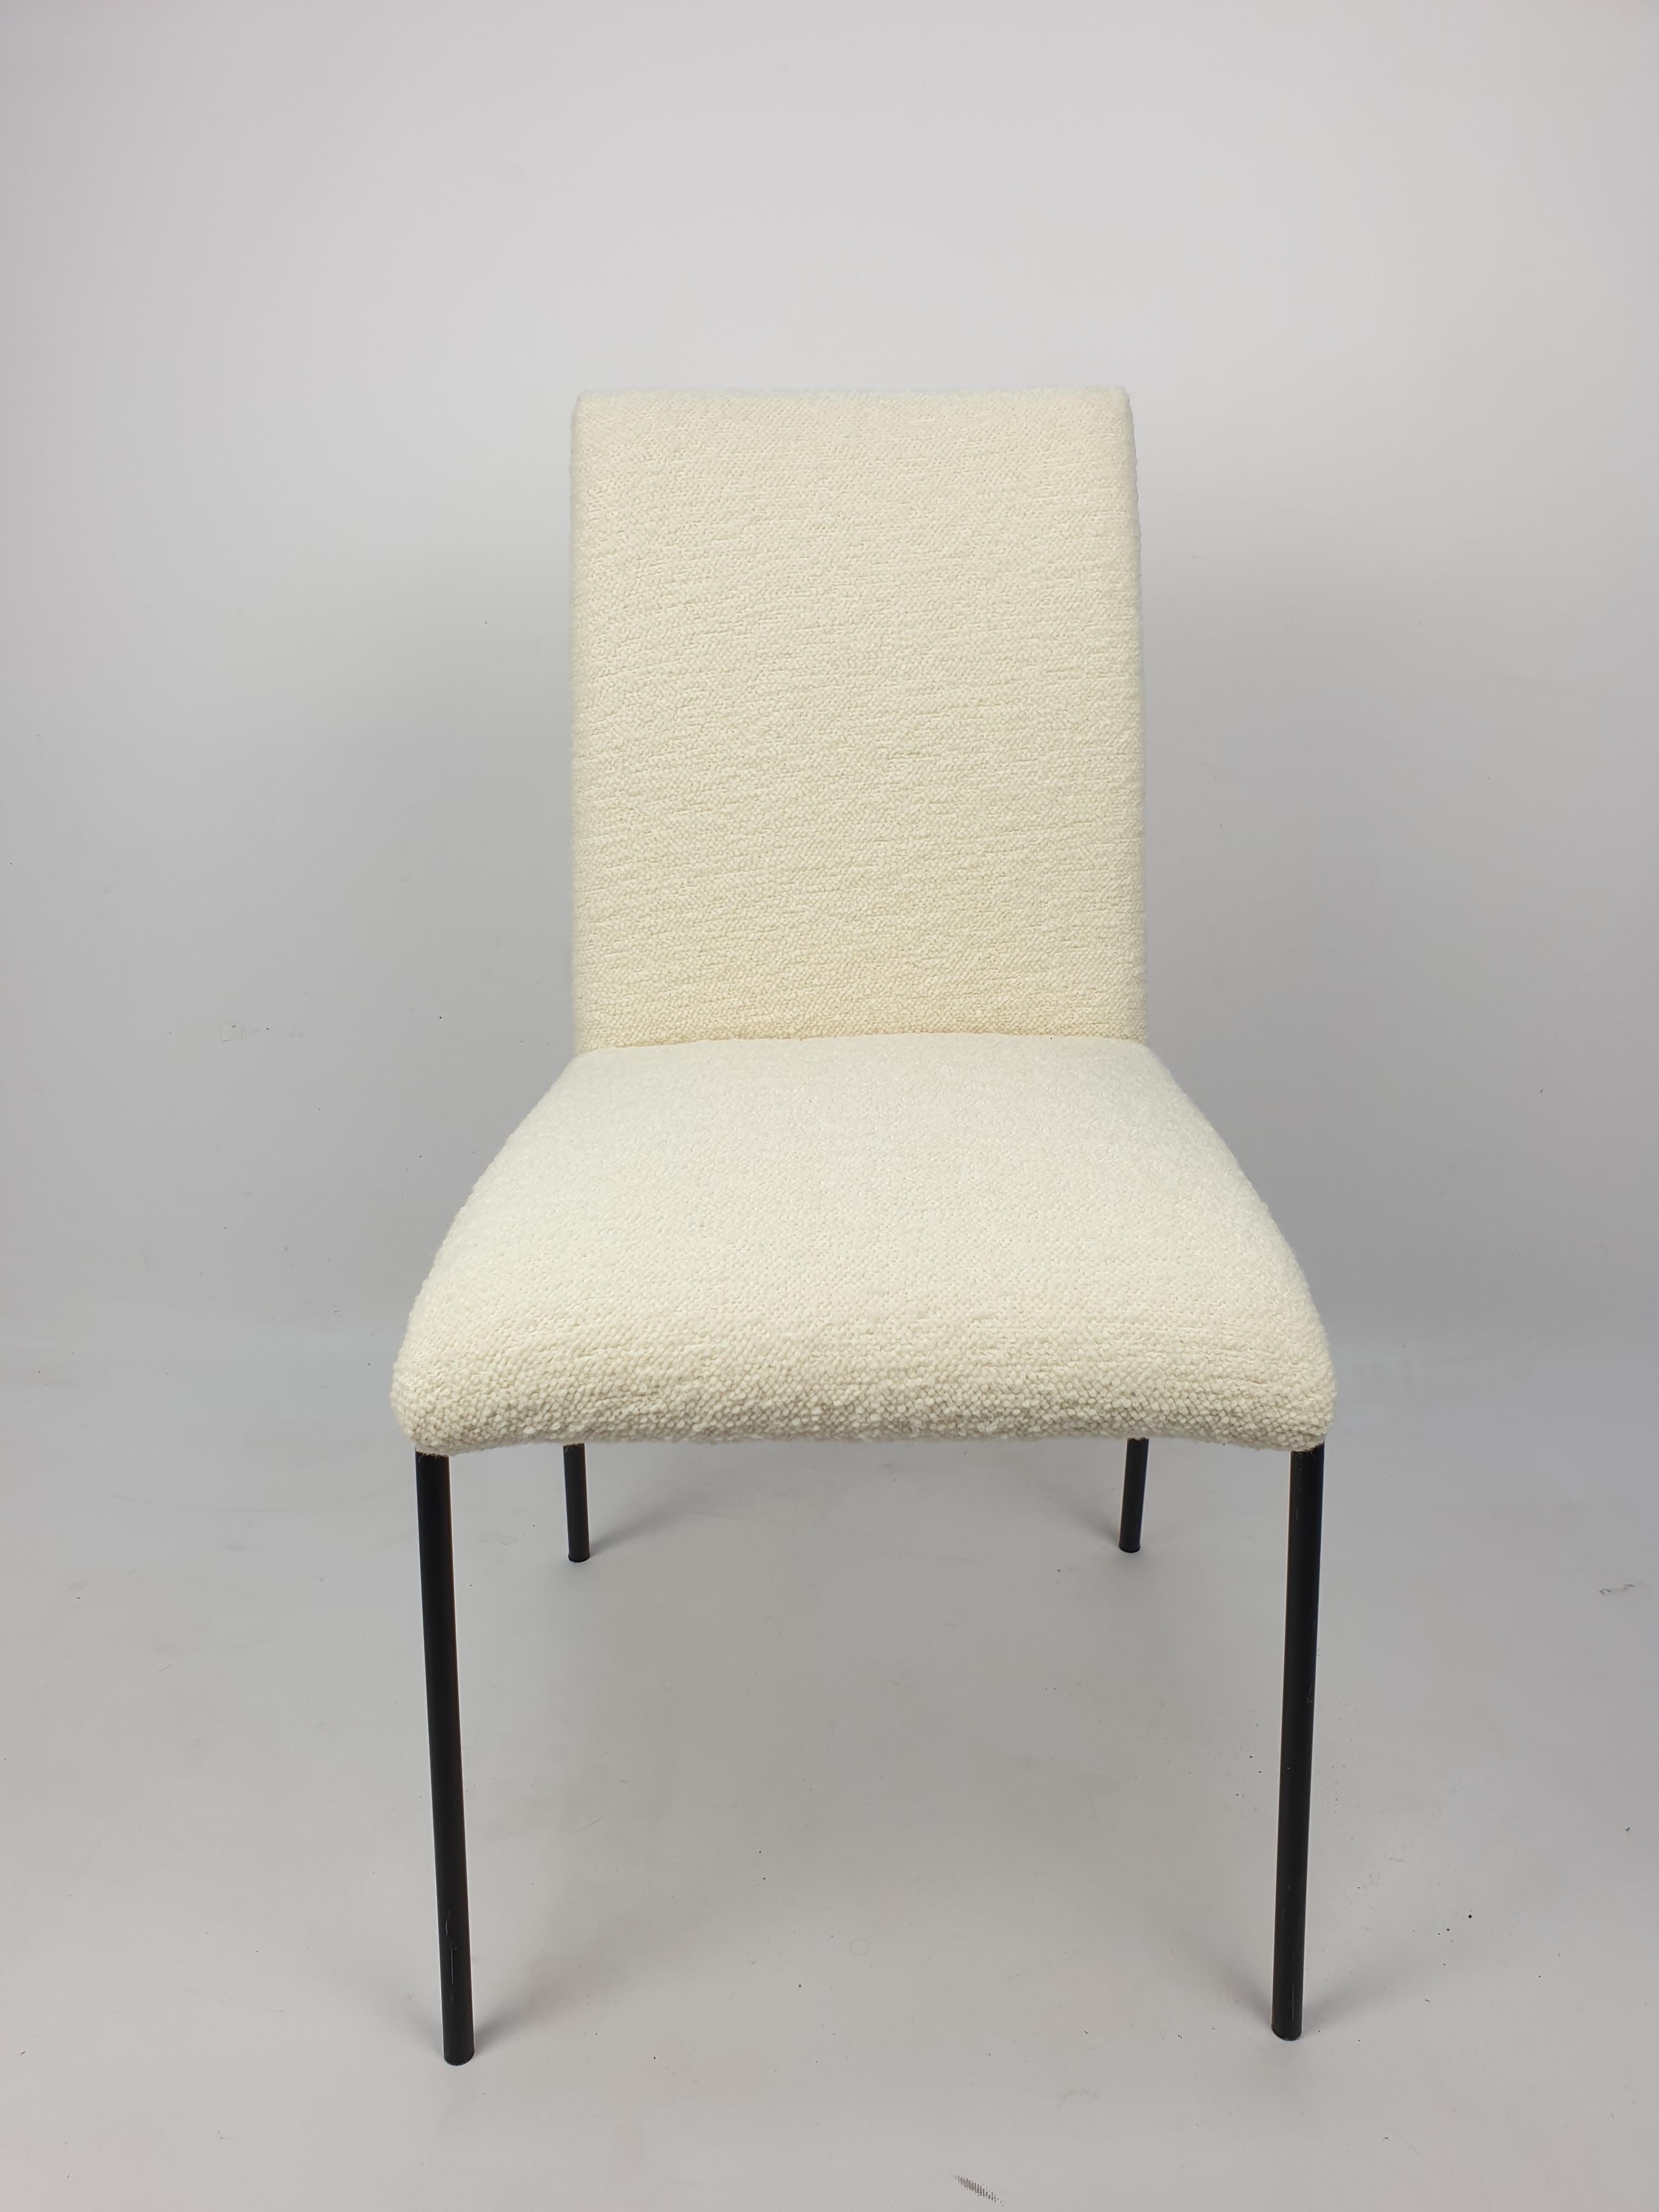 Mid-Century Modern Dining Chair by Pierre Guariche for Meurop, 1960s For Sale